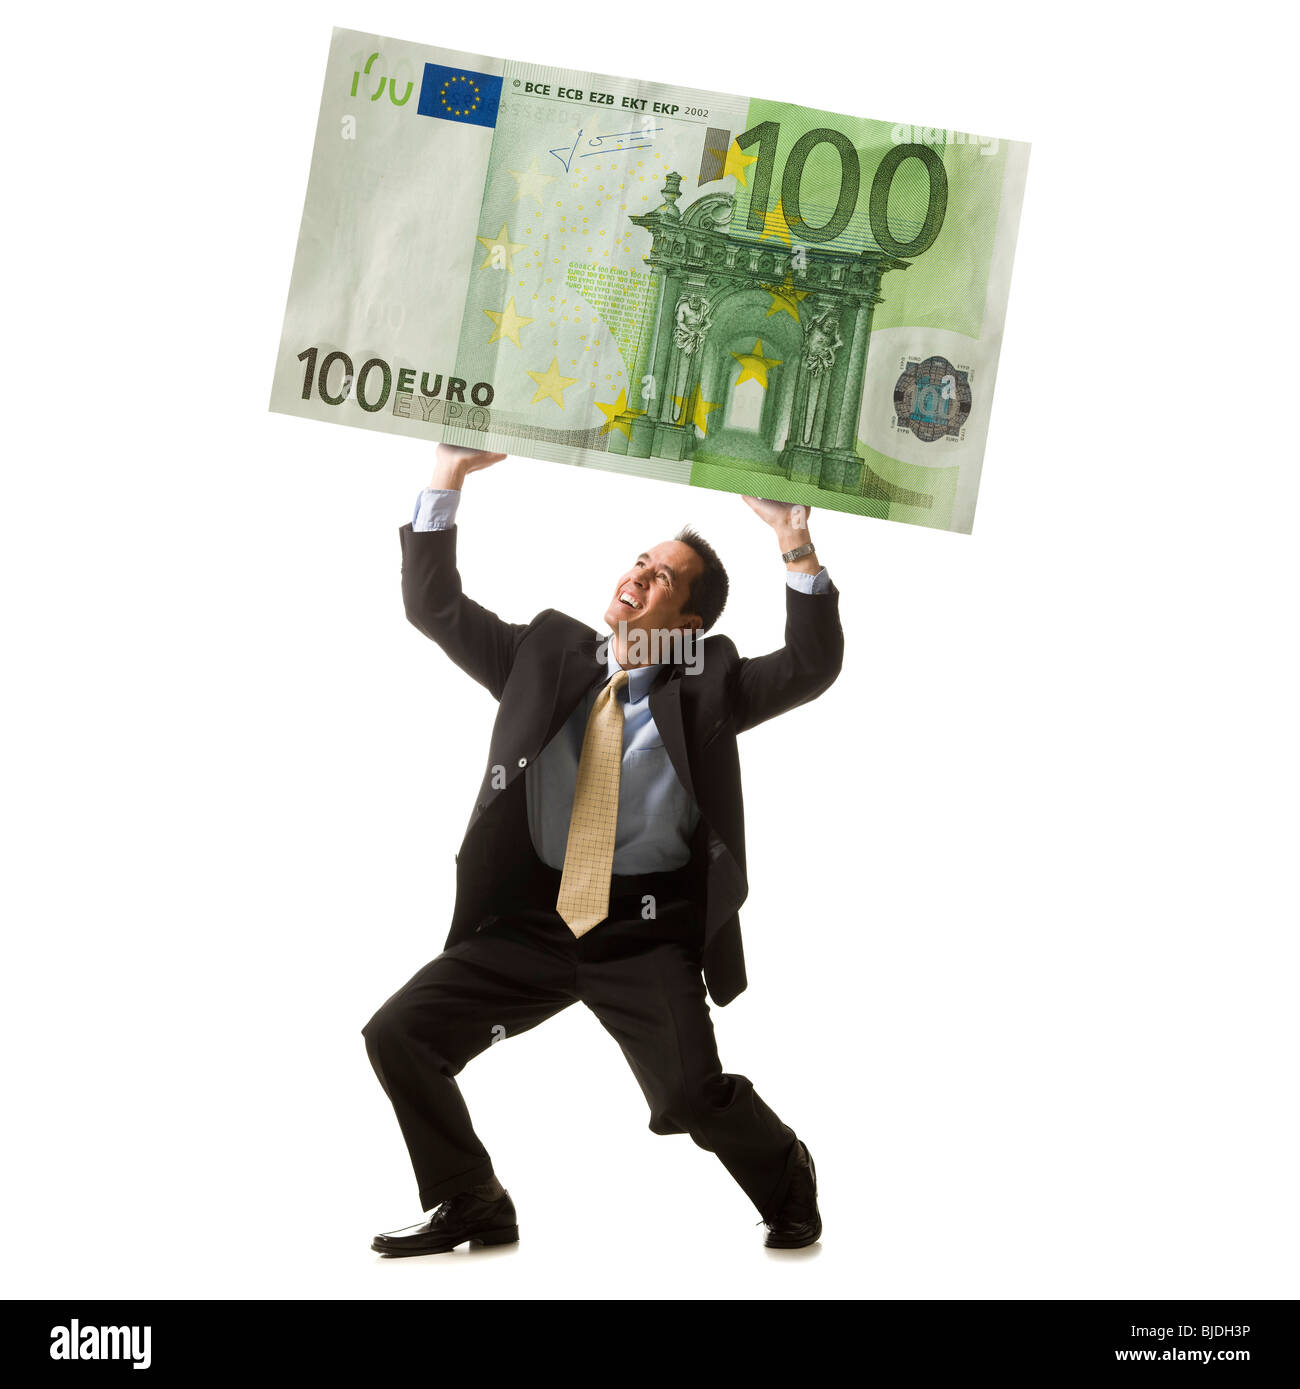 businessperson holding up a bank note Stock Photo